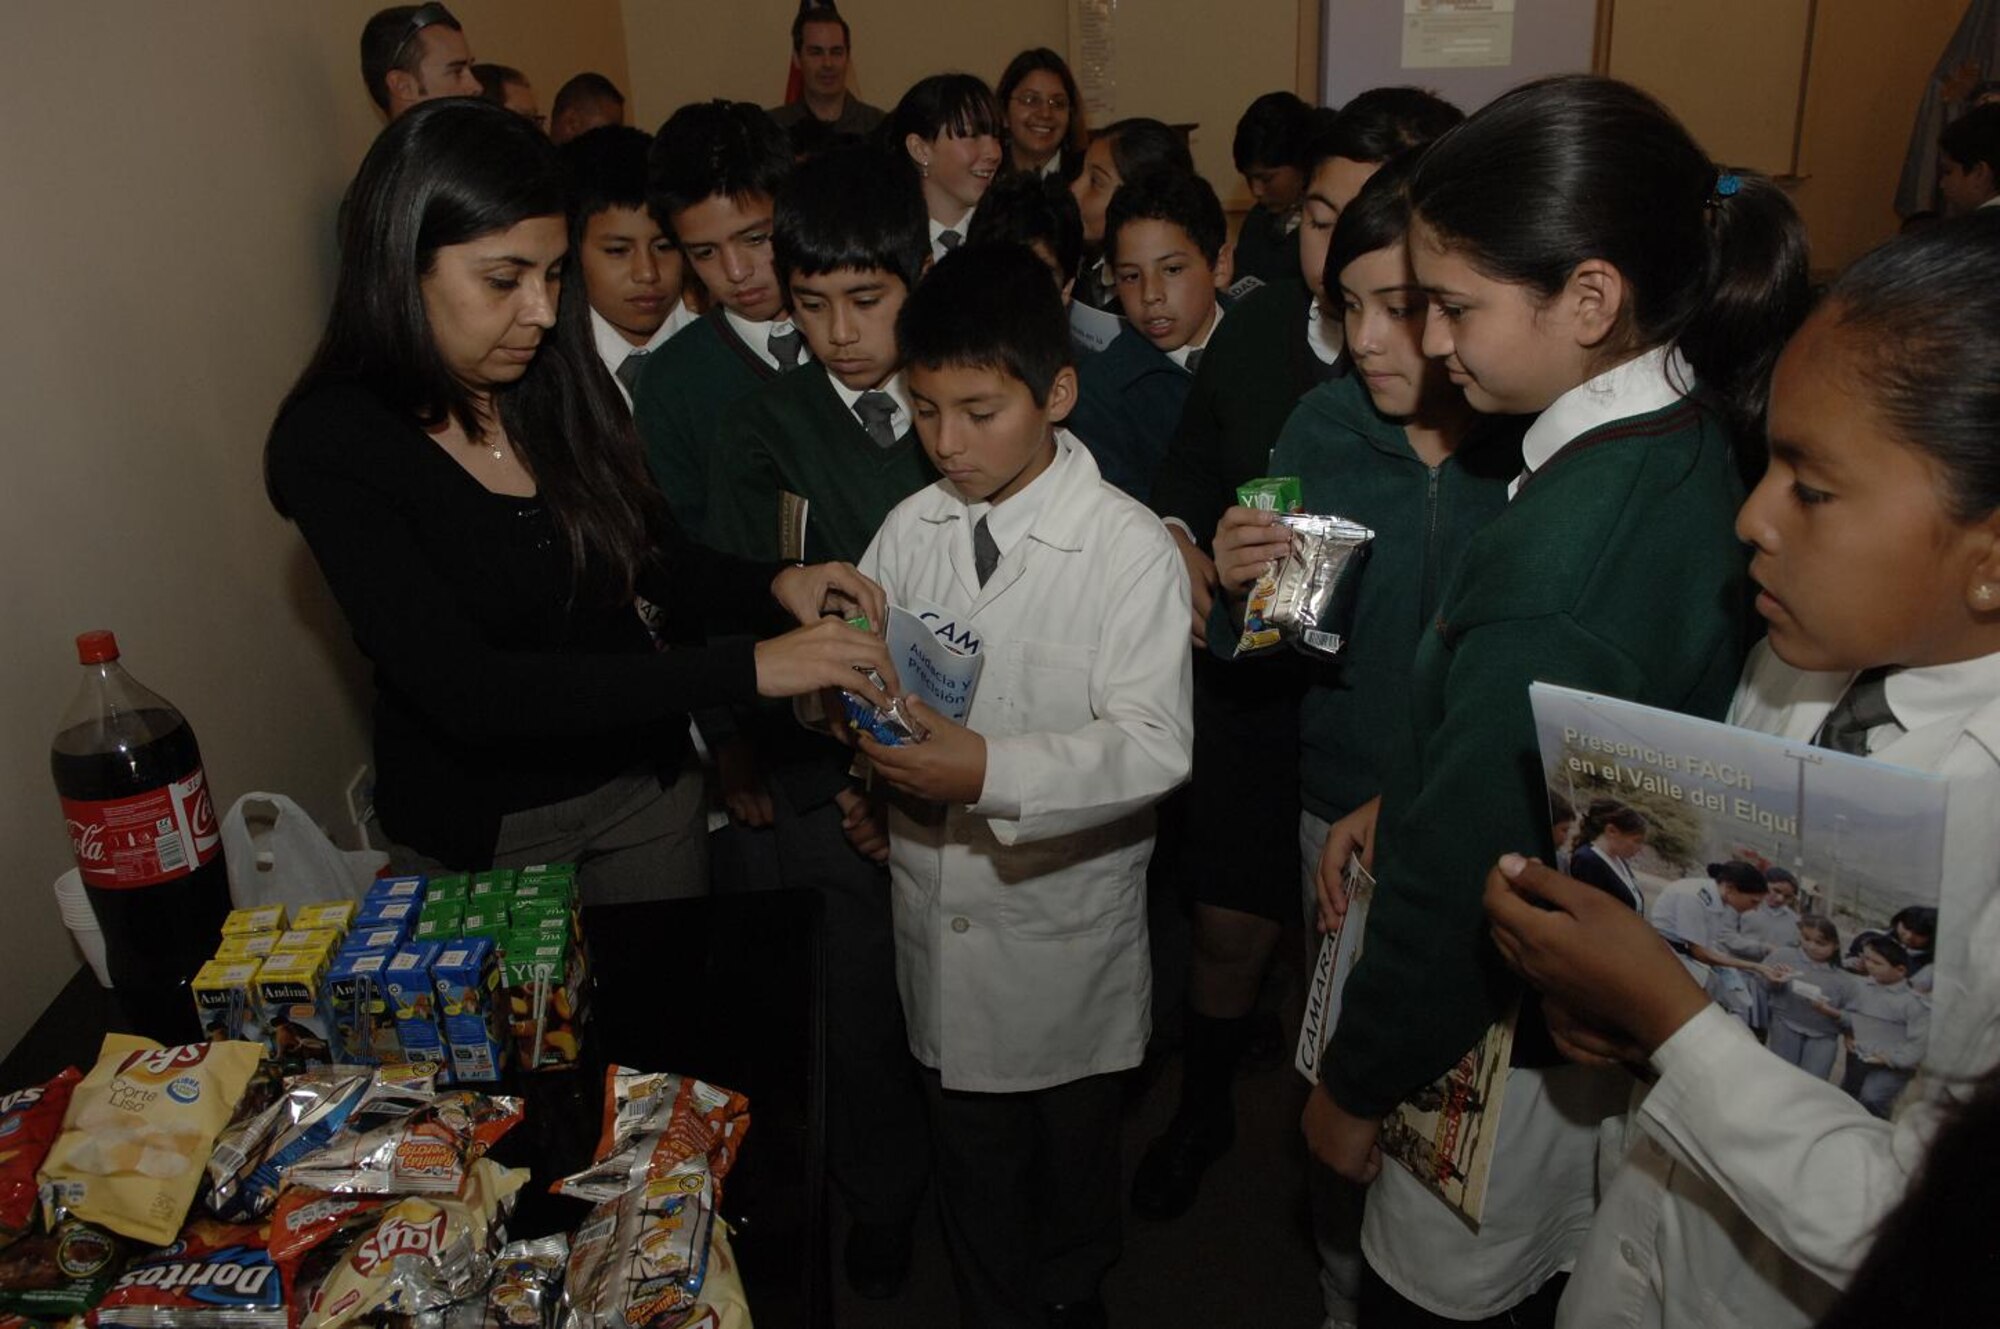 IQUIQUE, Chile -- Patricia Vidal, Fuerza Aerea De Chile public affairs officer, hands out snacks to students of Colegio Macaya during a base tour here Oct. 30. Students were invited to the base to see U.S. and Chilean Air Force aircraft, and meet Airmen. (U.S. Air Force photo by Tech. Sgt. Eric Petosky)